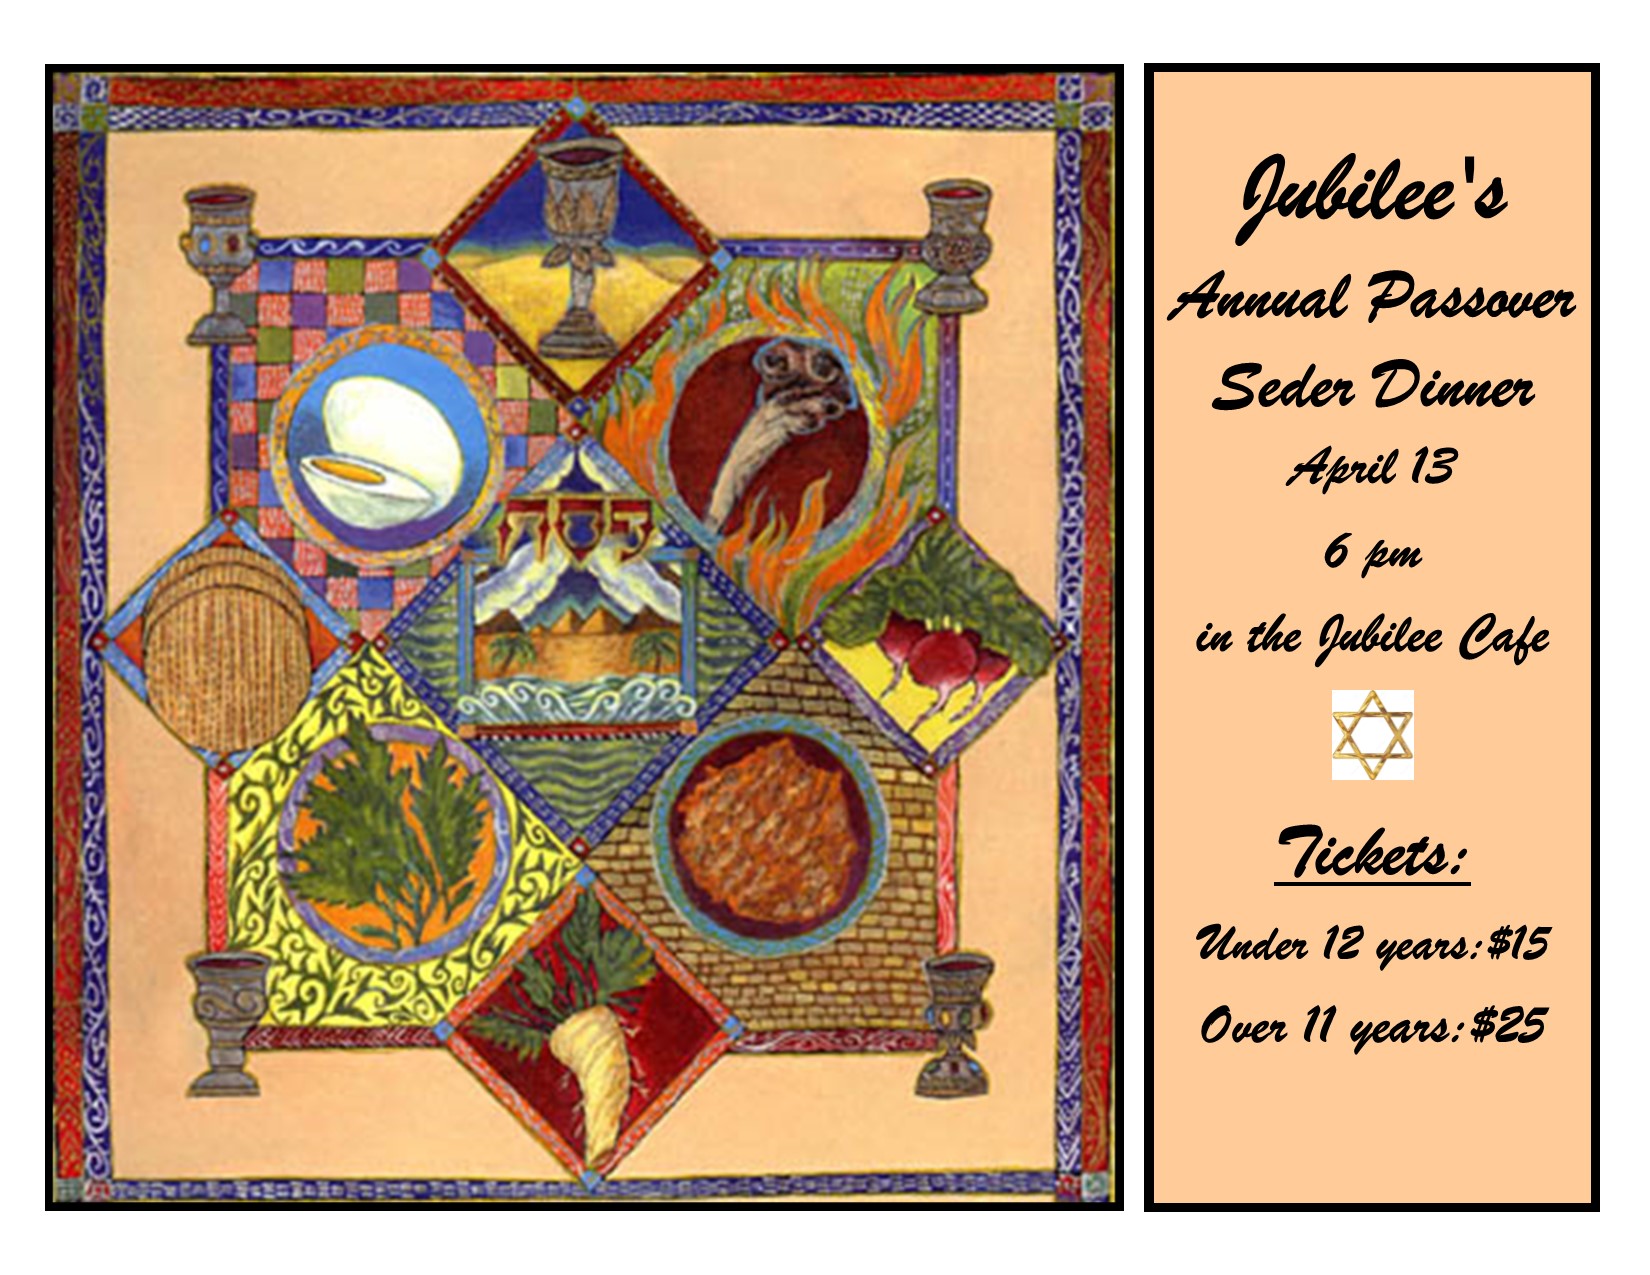 Jubilee’s Annual Passover Seder